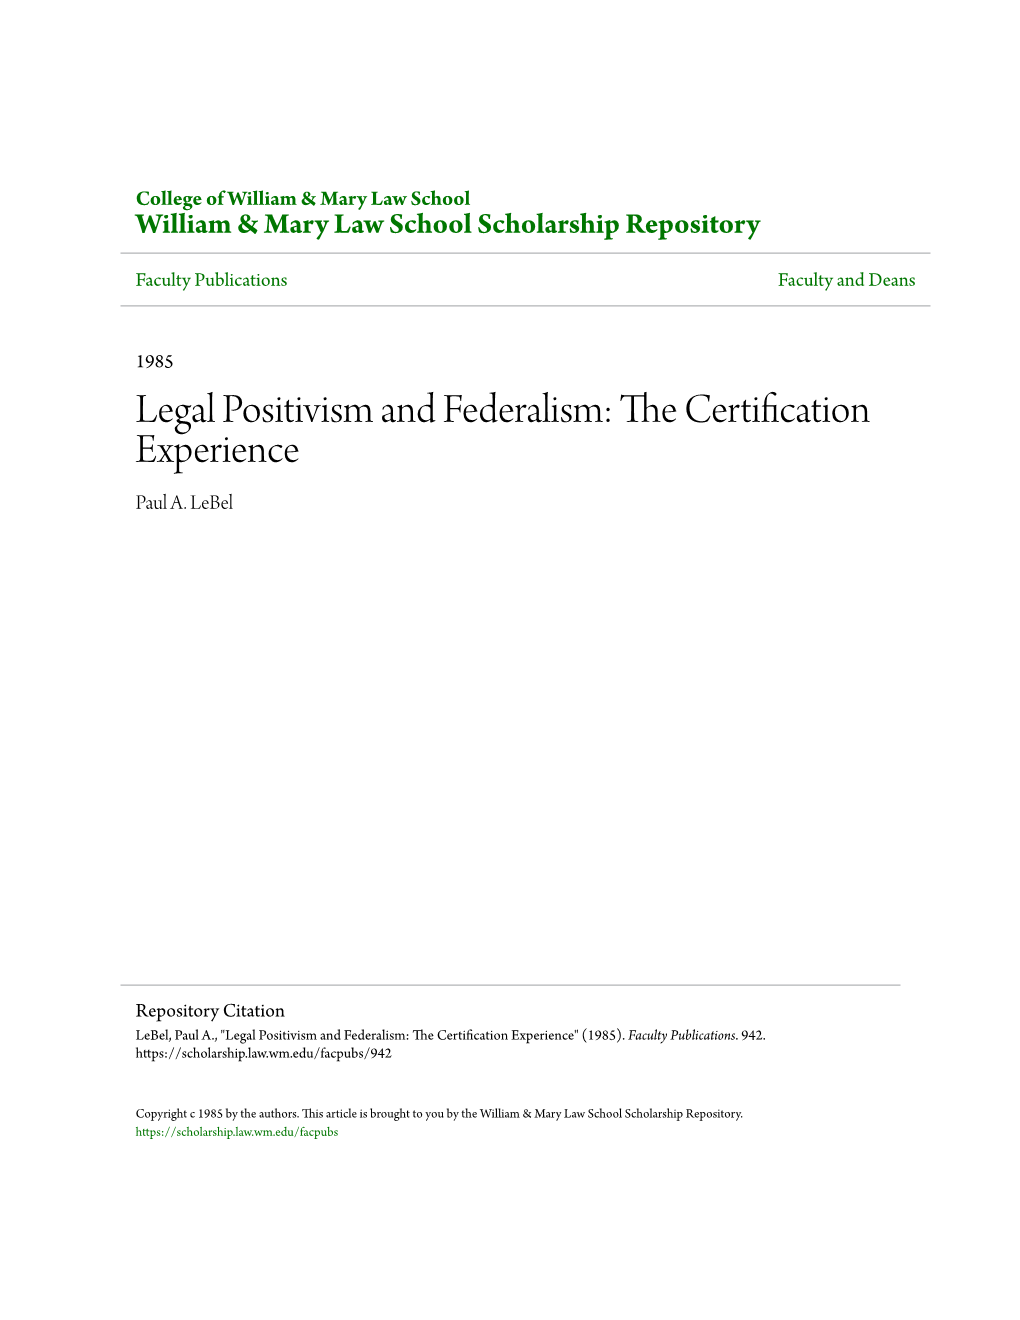 LEGAL POSITIVISM and FEDERALISM: the CERTIFICATION EXPERIENCE Paul A